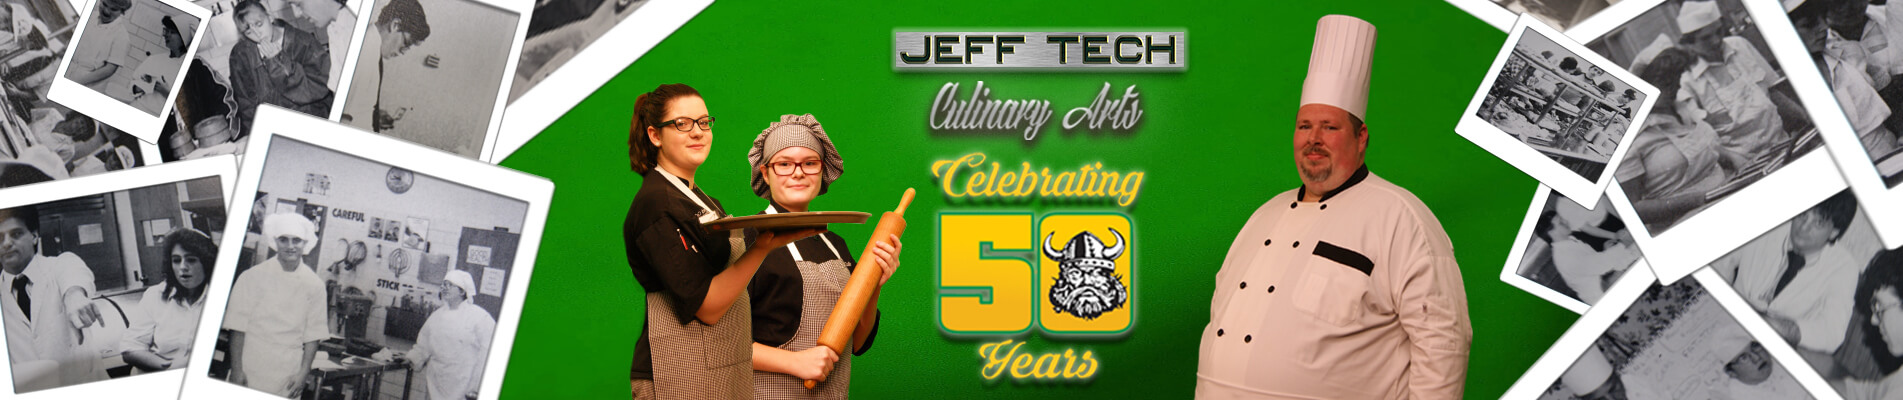 Jeff Tech Culinary Arts Celebrating 50 Years. Learn more about our CTE Programs.